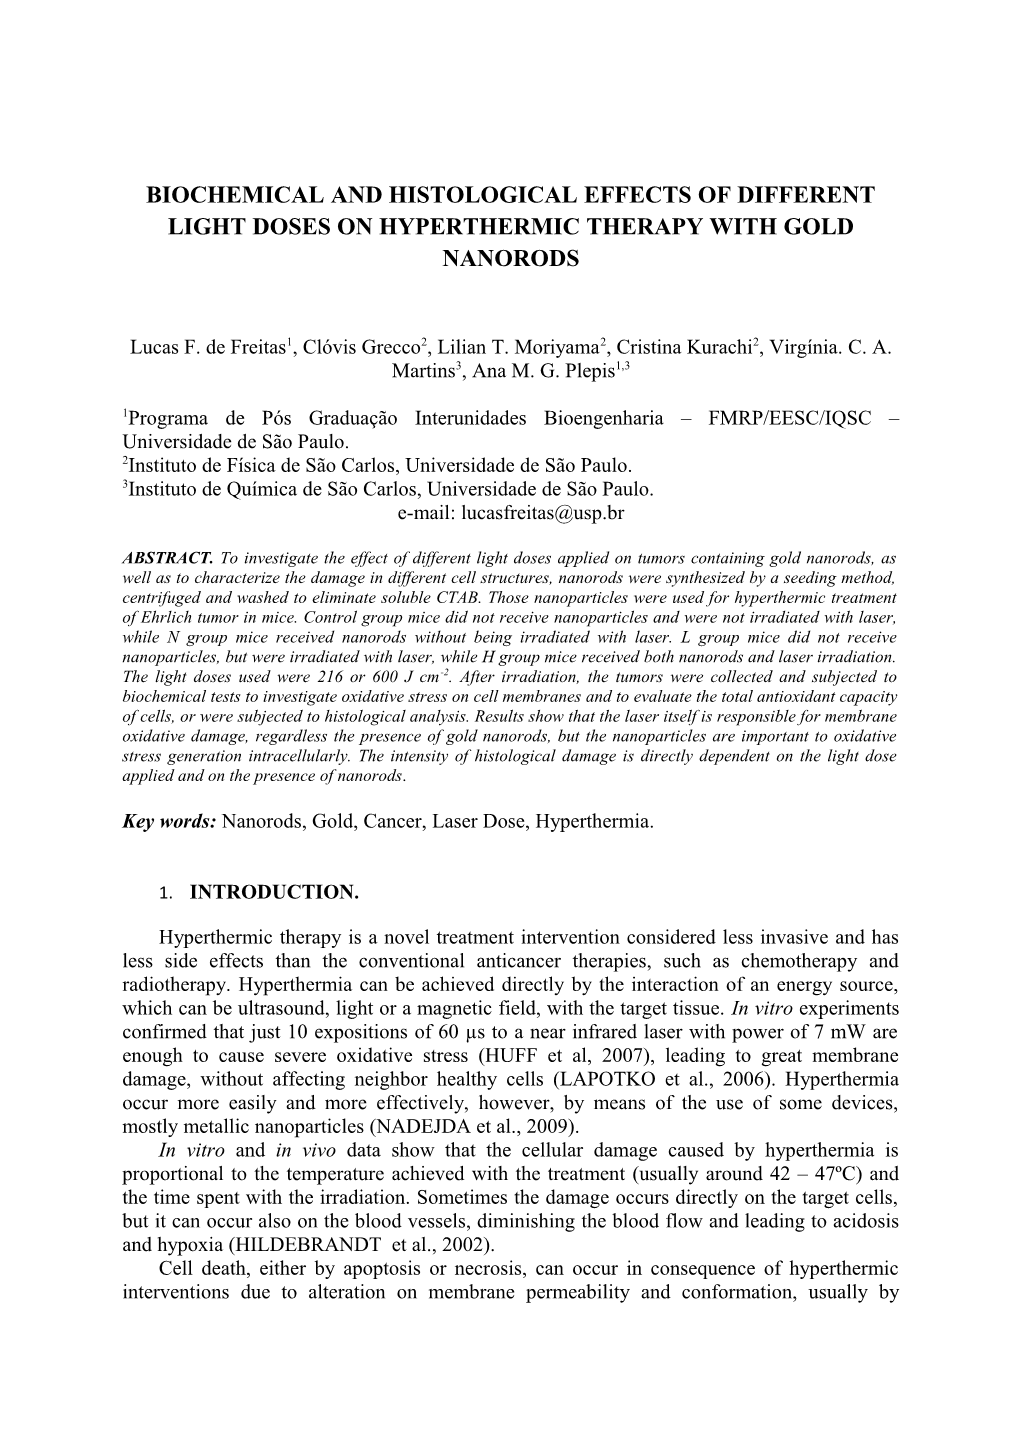 Biochemical and Histological Effects of Different Light Doses on Hyperthermic Therapy